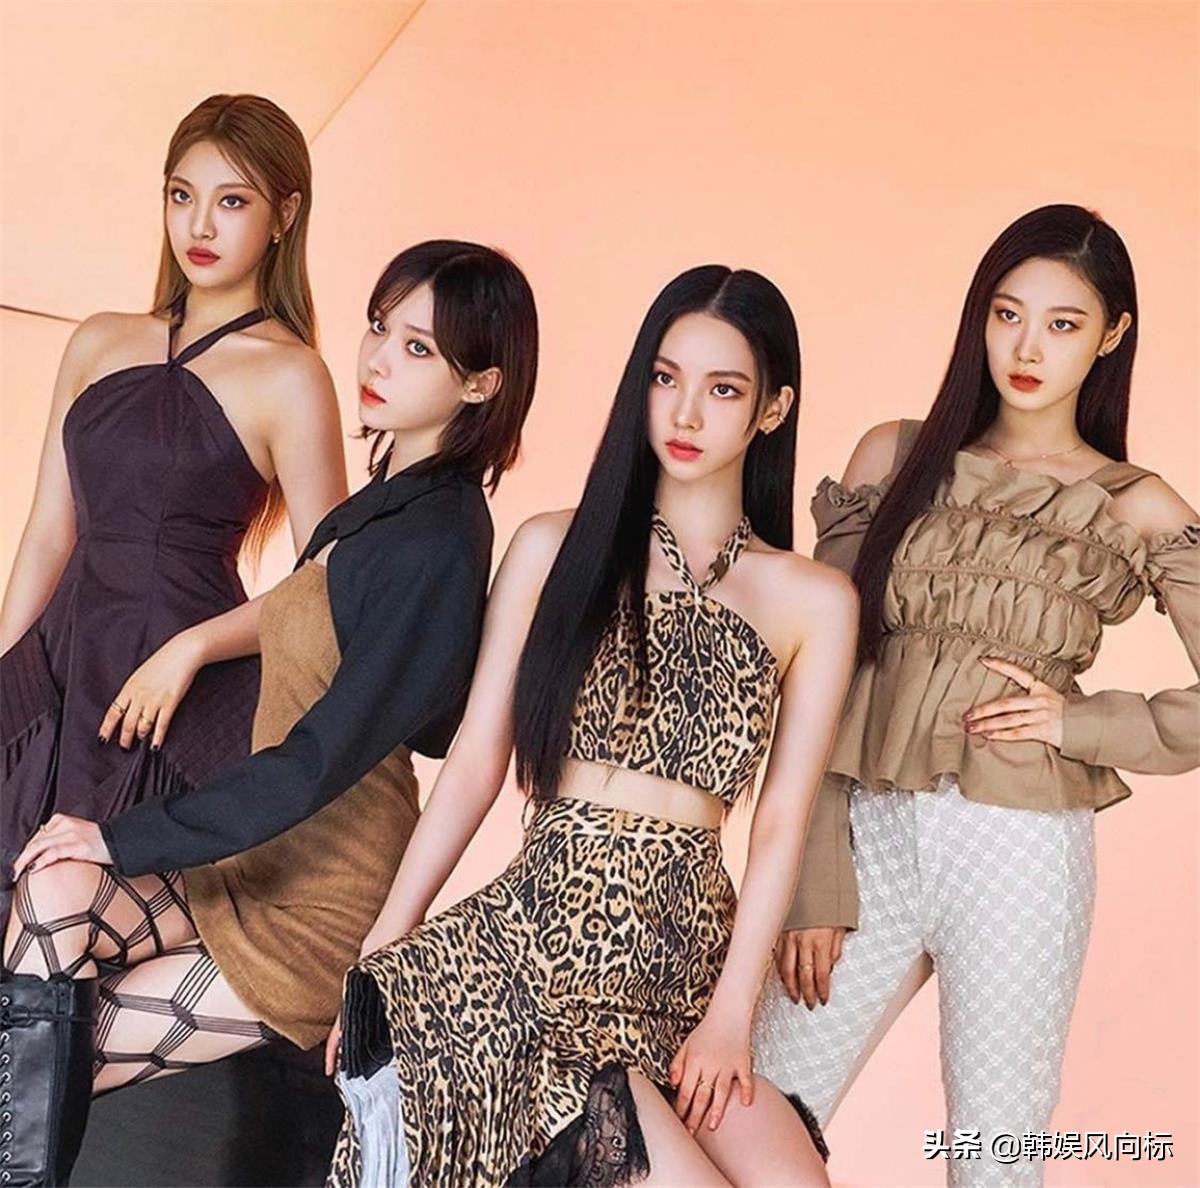 Aespa's choreographer is accused of copying movements from ITZY and ...